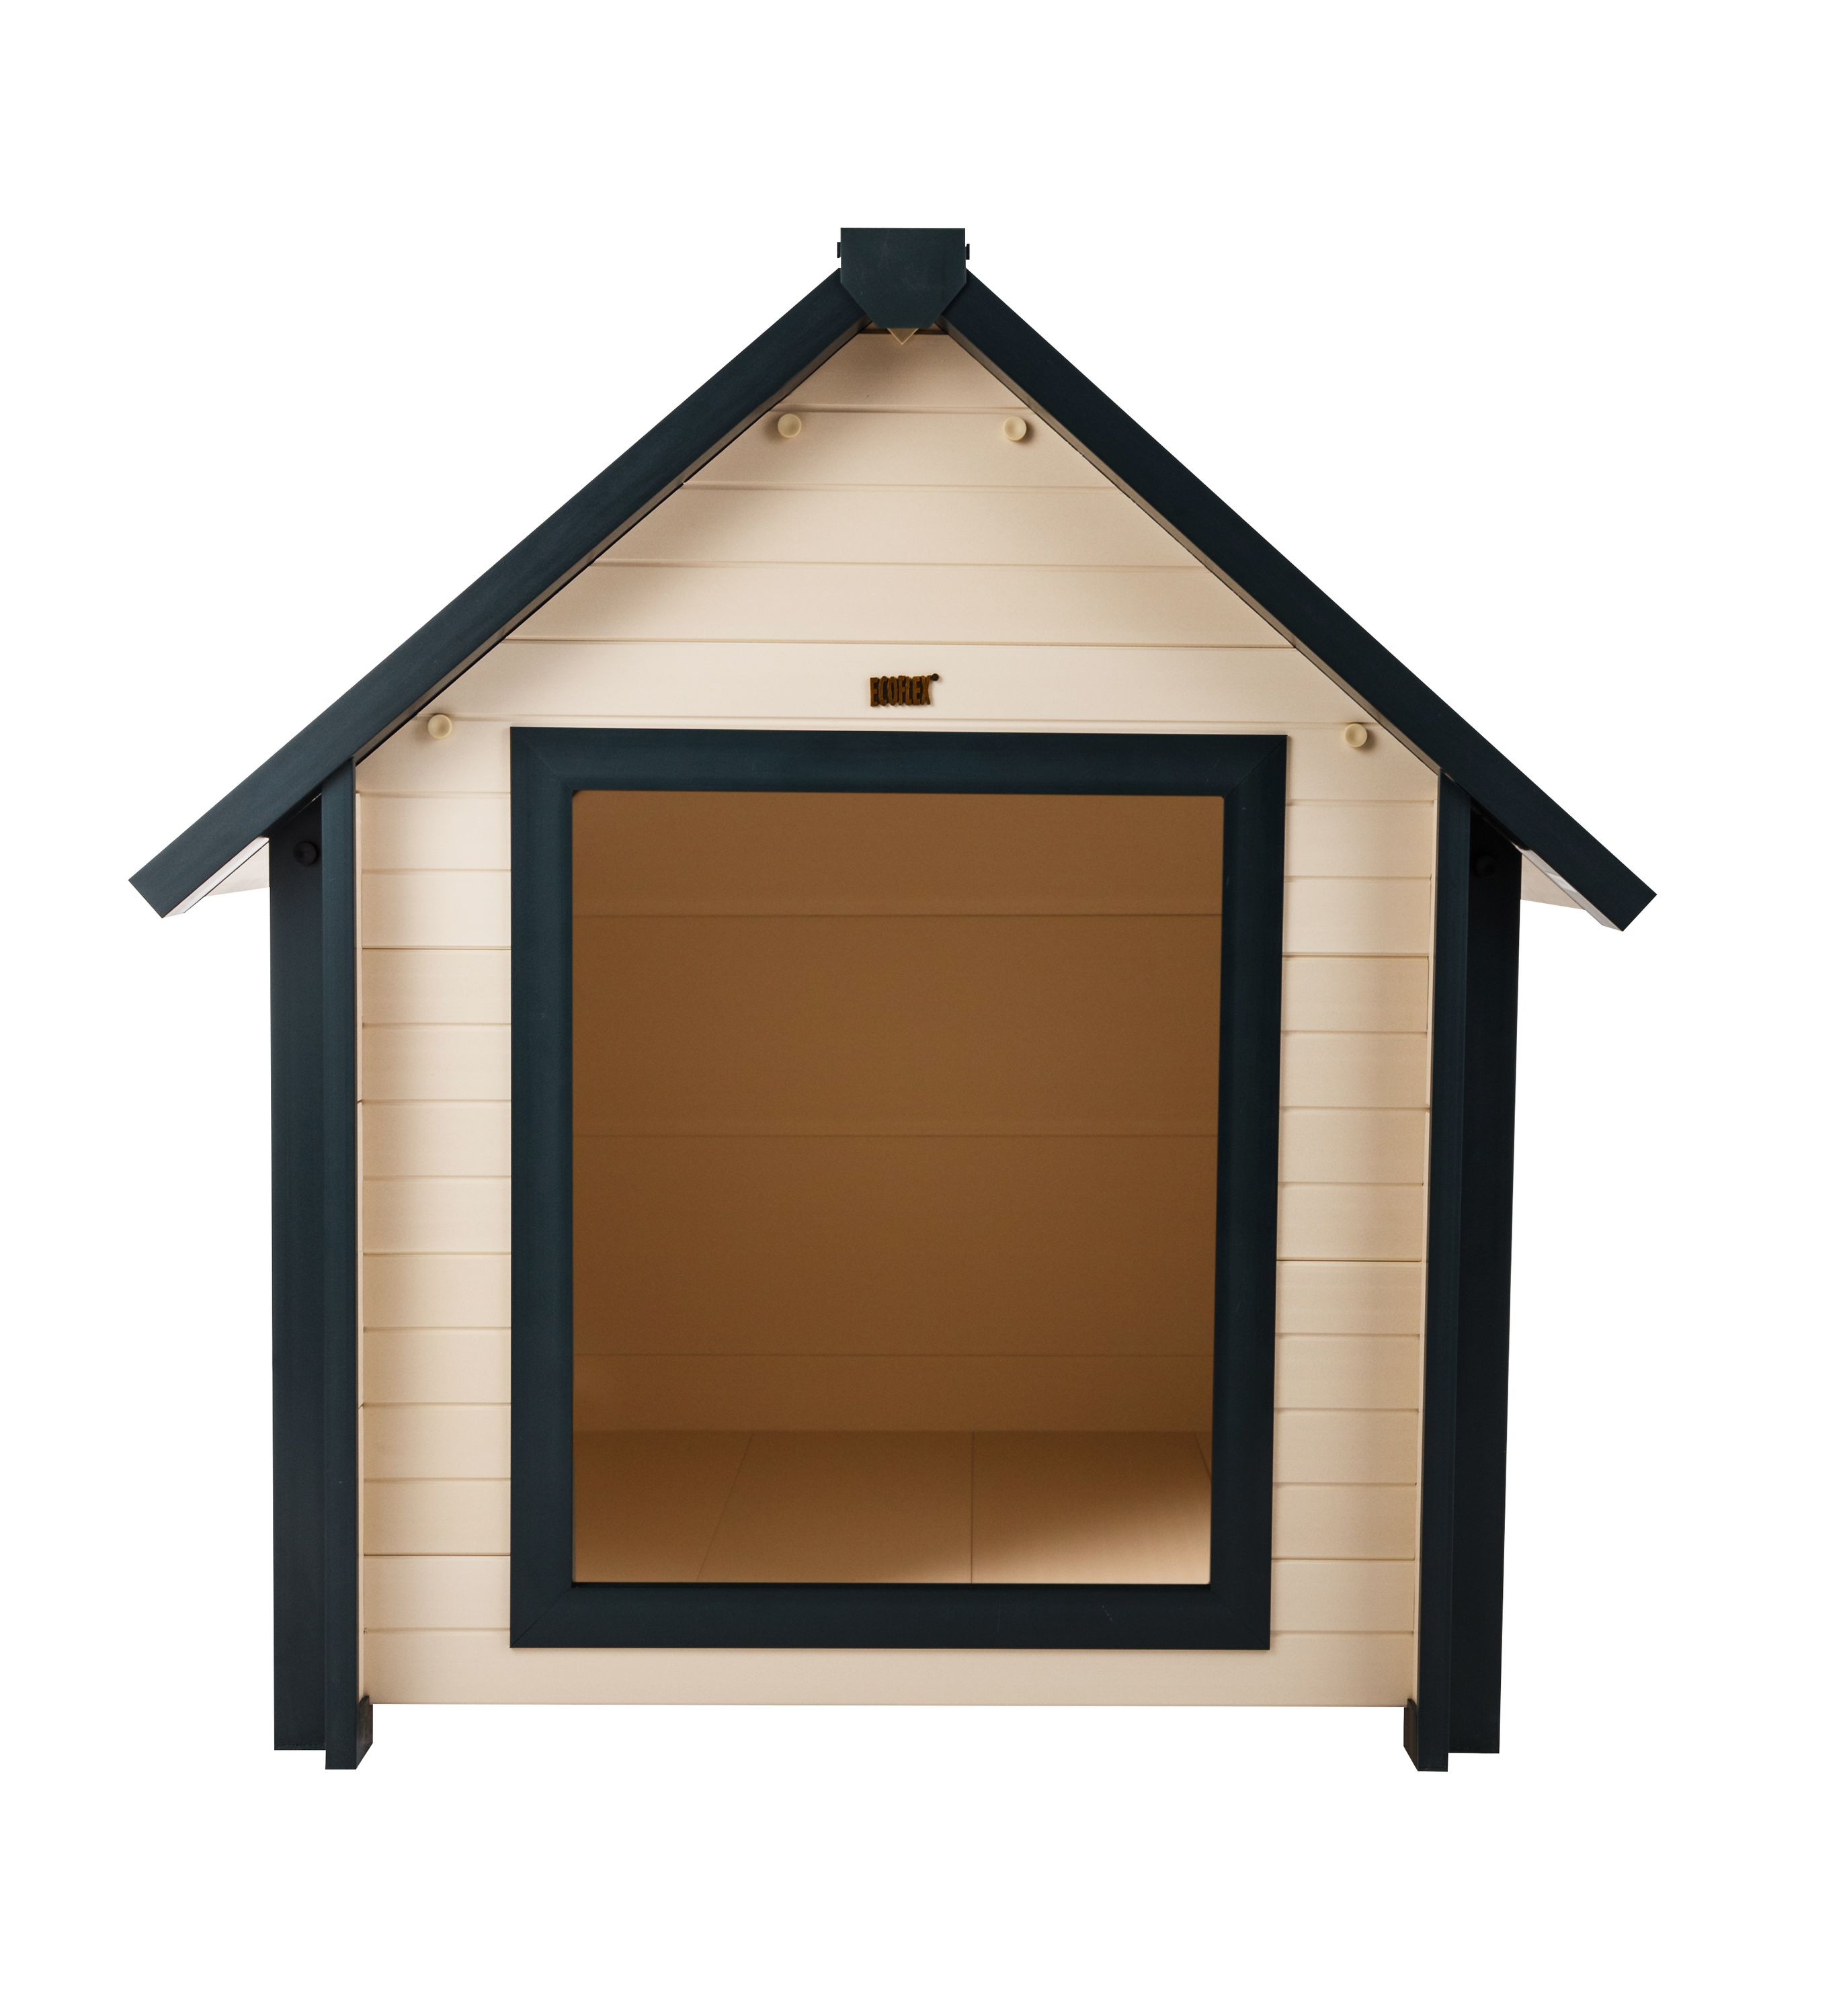 36" x 48" Dog House Plans Med Dog 13 Lean To Roof Pet Size To 100 lbs